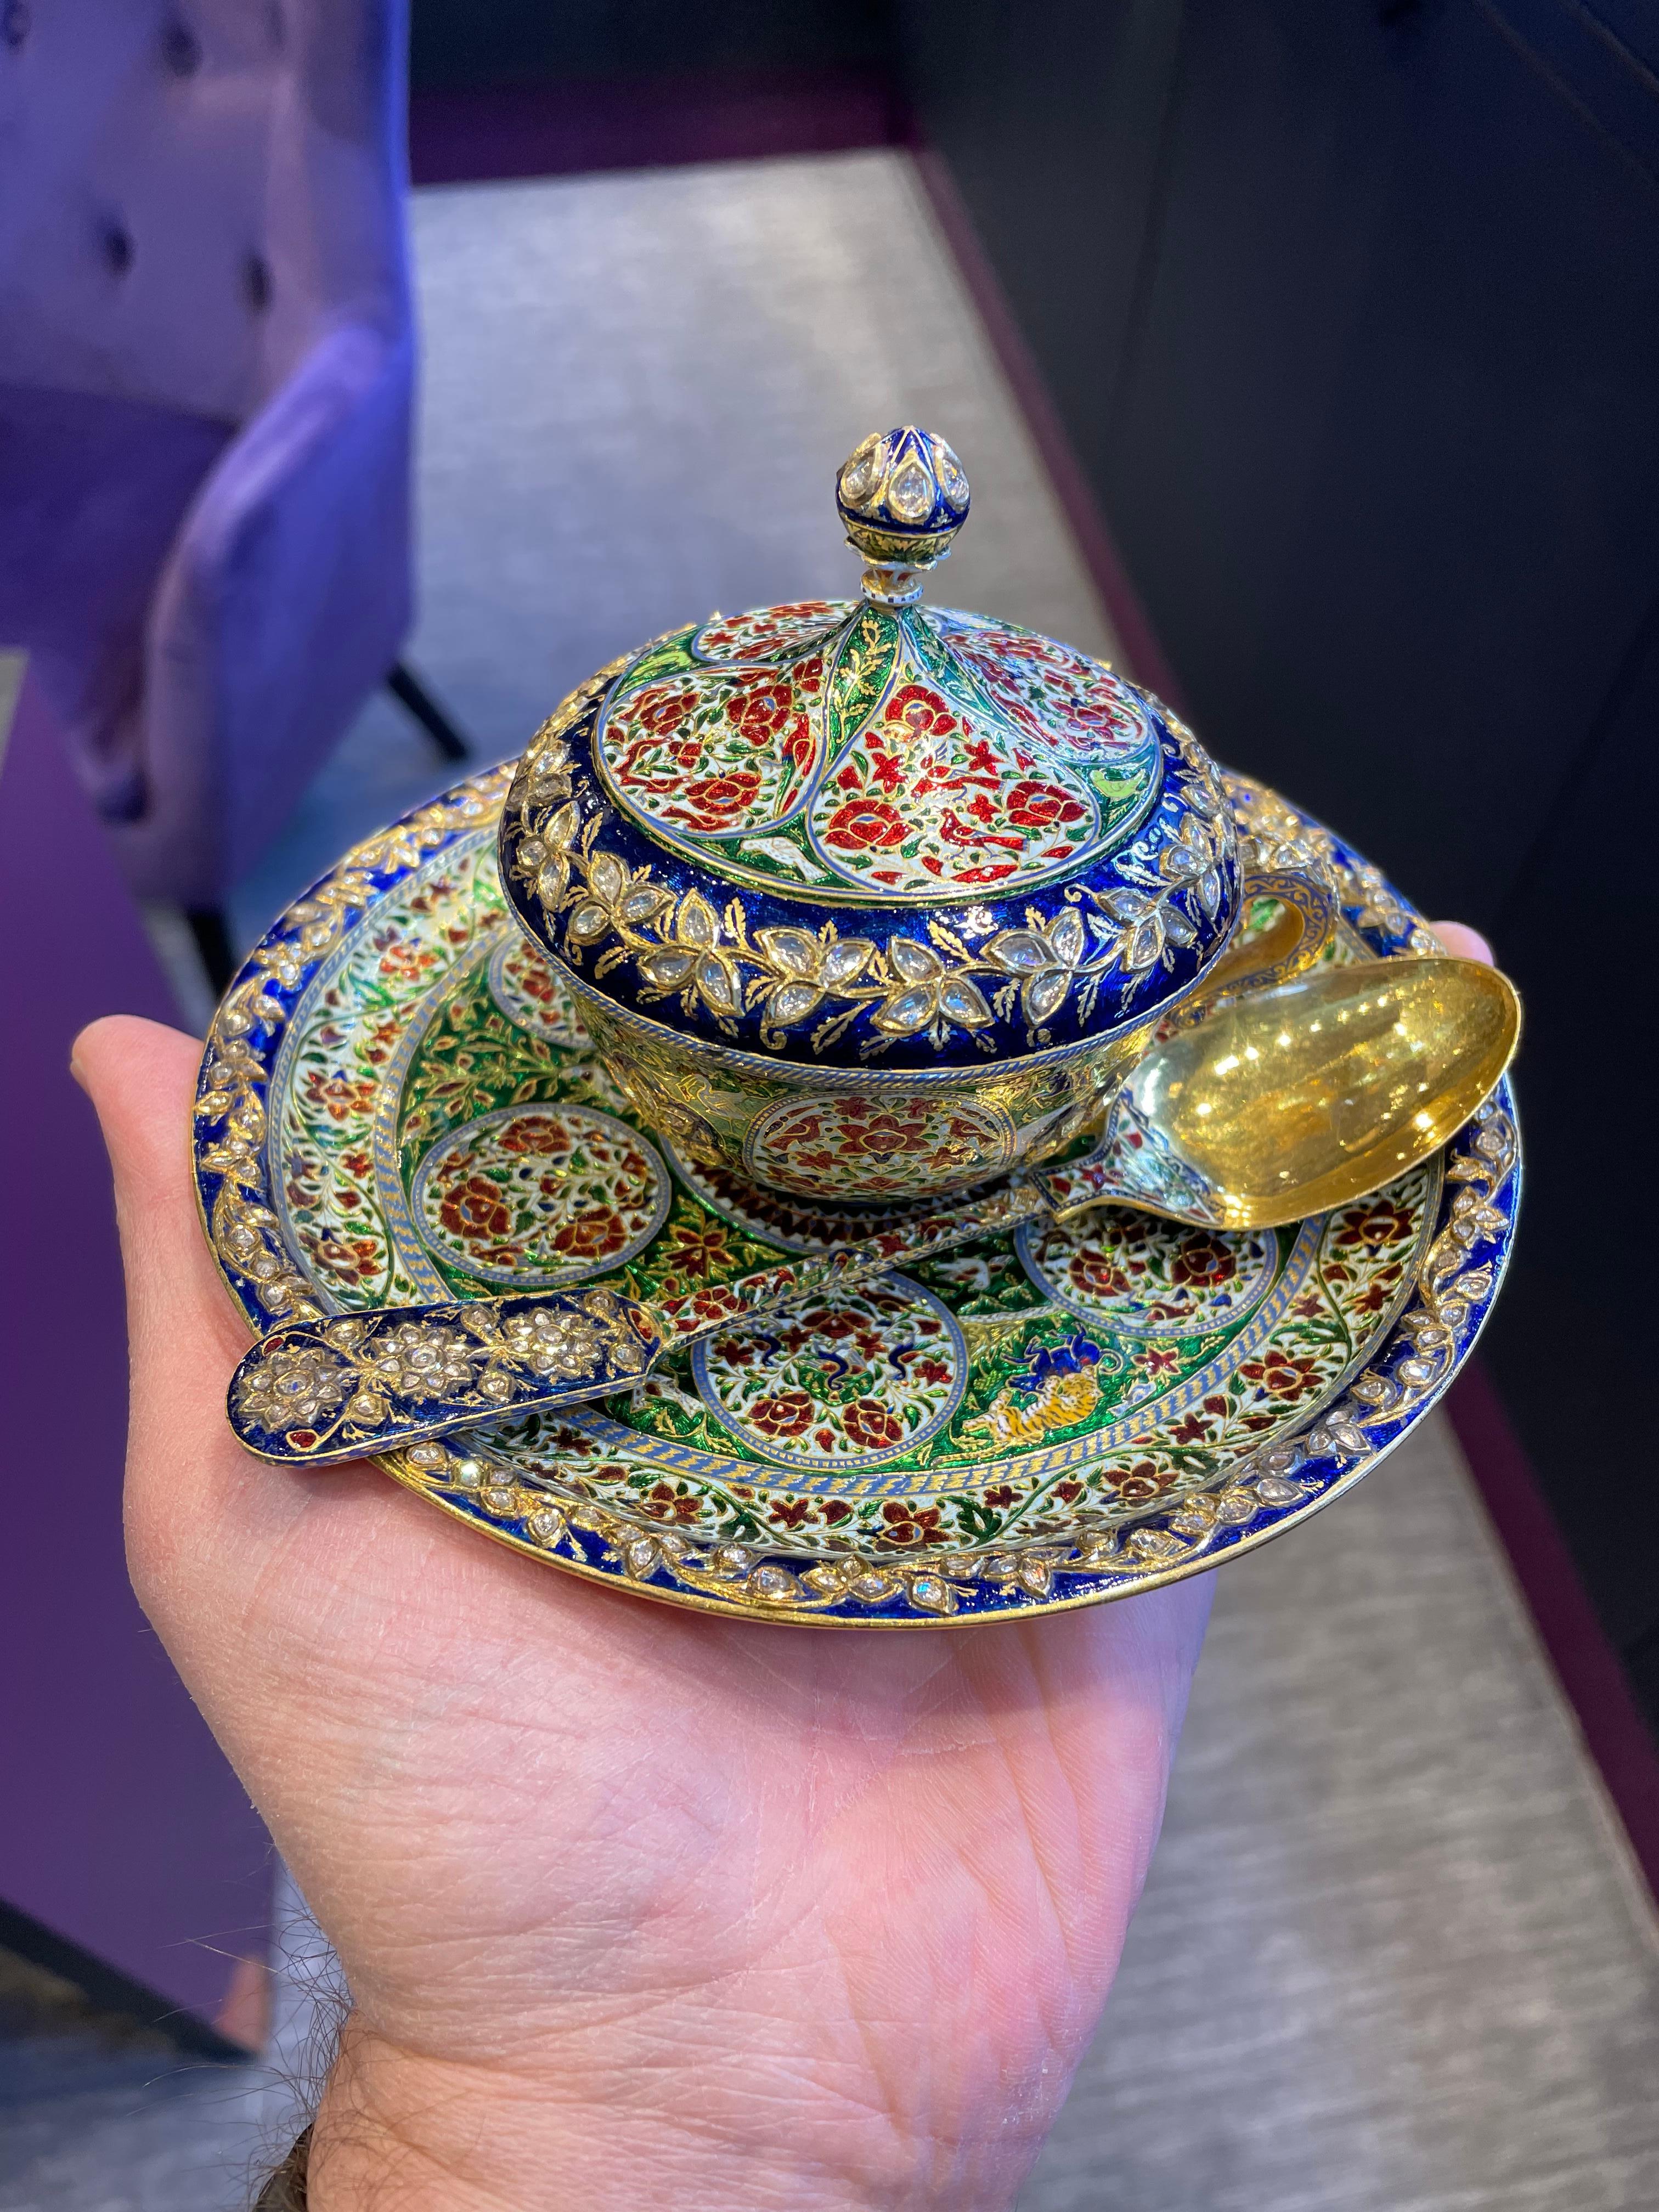 Antique Mughal Indian Enamel and Diamond Cup Saucer & Spoon Set 

A 200+ year old masterpiece: Incredible enamel on gold tea cup, saucer, and spoon. Set with rose cut diamonds. 
The epitome of Mughal extravagance! 

Measurements: 
Spoon: 5.5